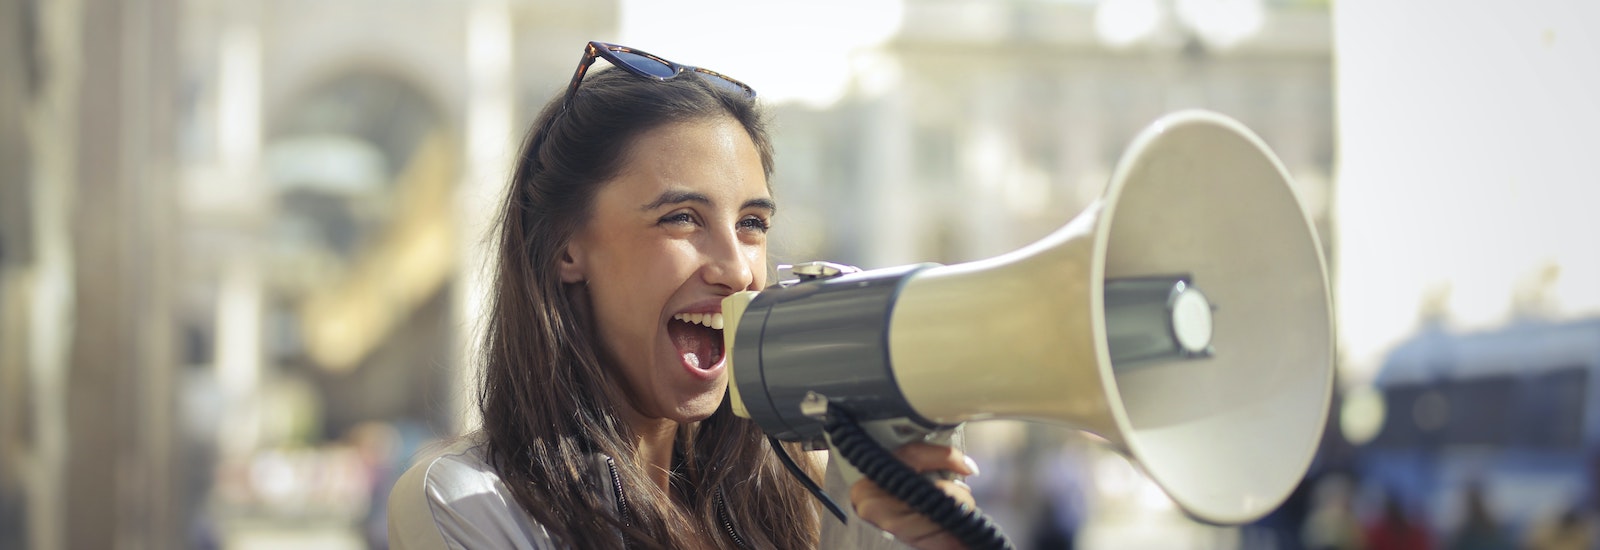 Stock image of a woman happily holding a megaphone to share a message.